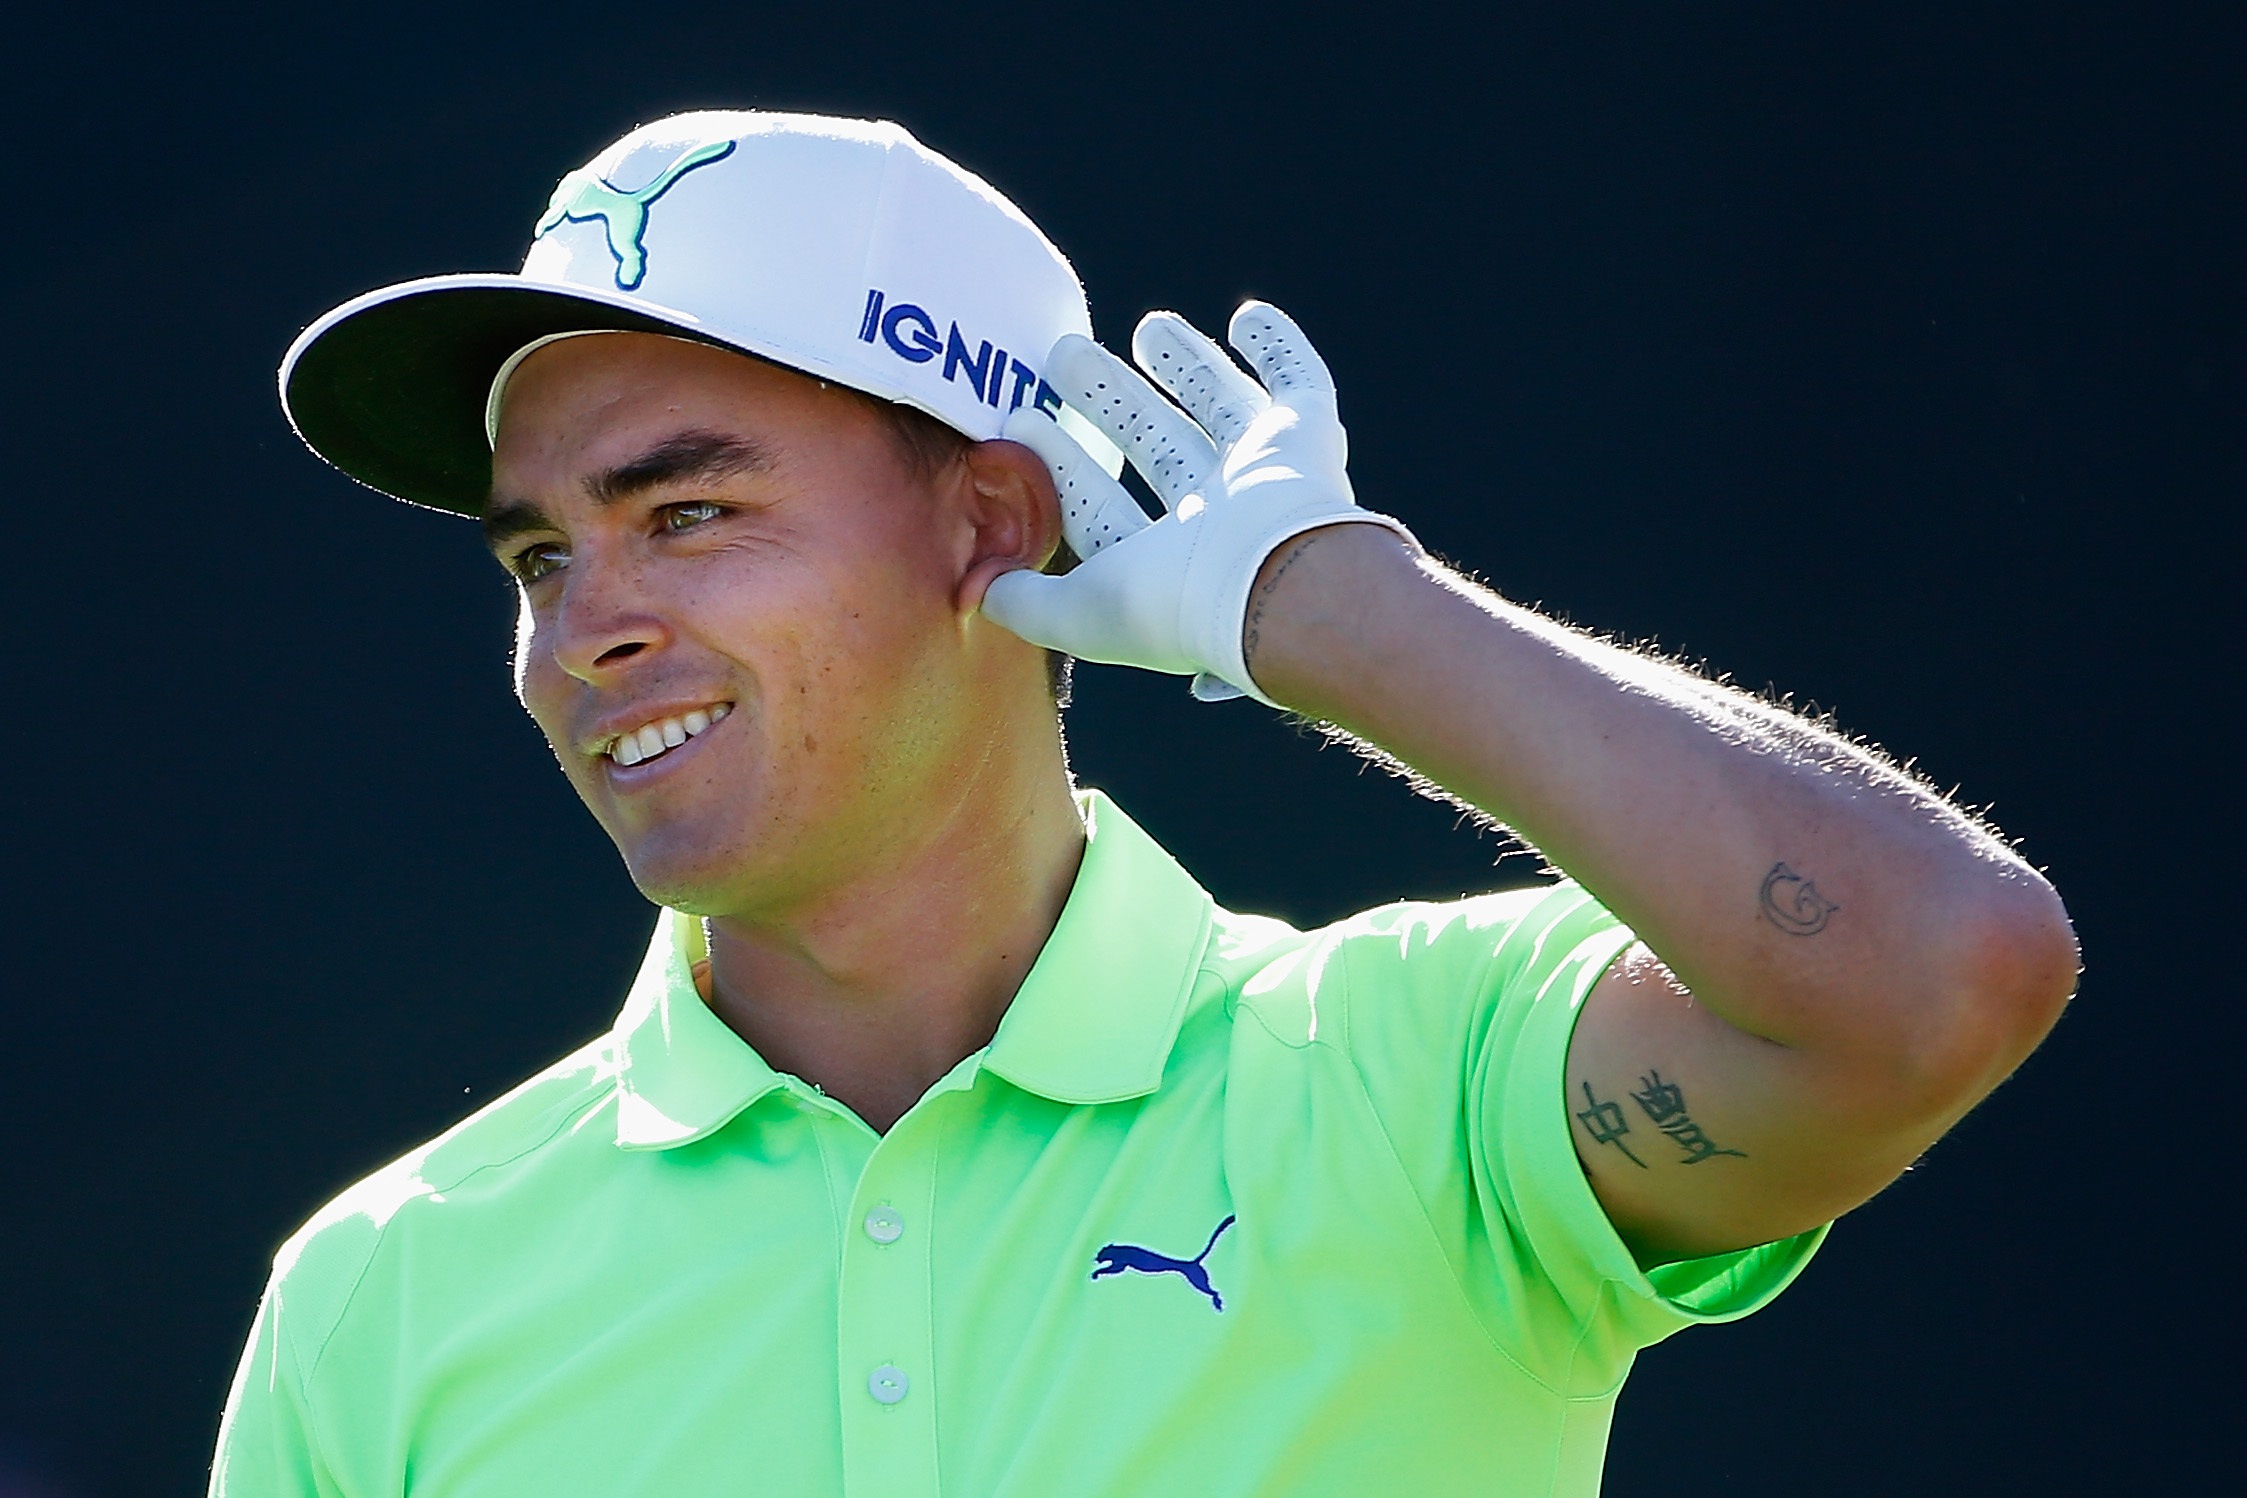 Rickie Fowler and Cobra Puma is "a perfect marriage", says Olsavsky 